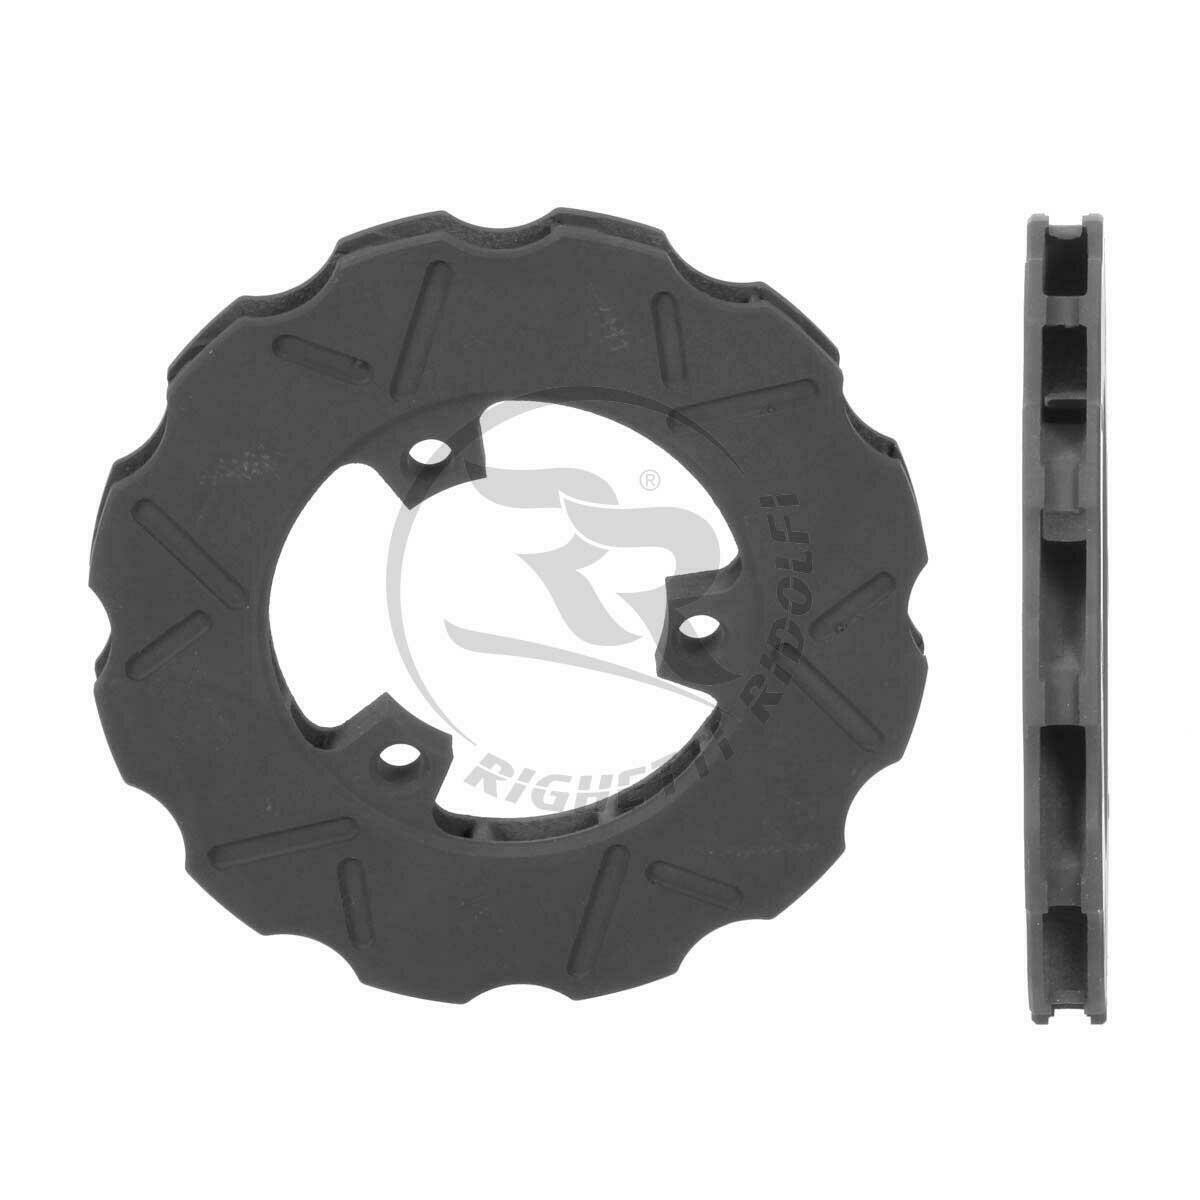 Kz-Front Ventilated Brake Disc 150x14mm Floating